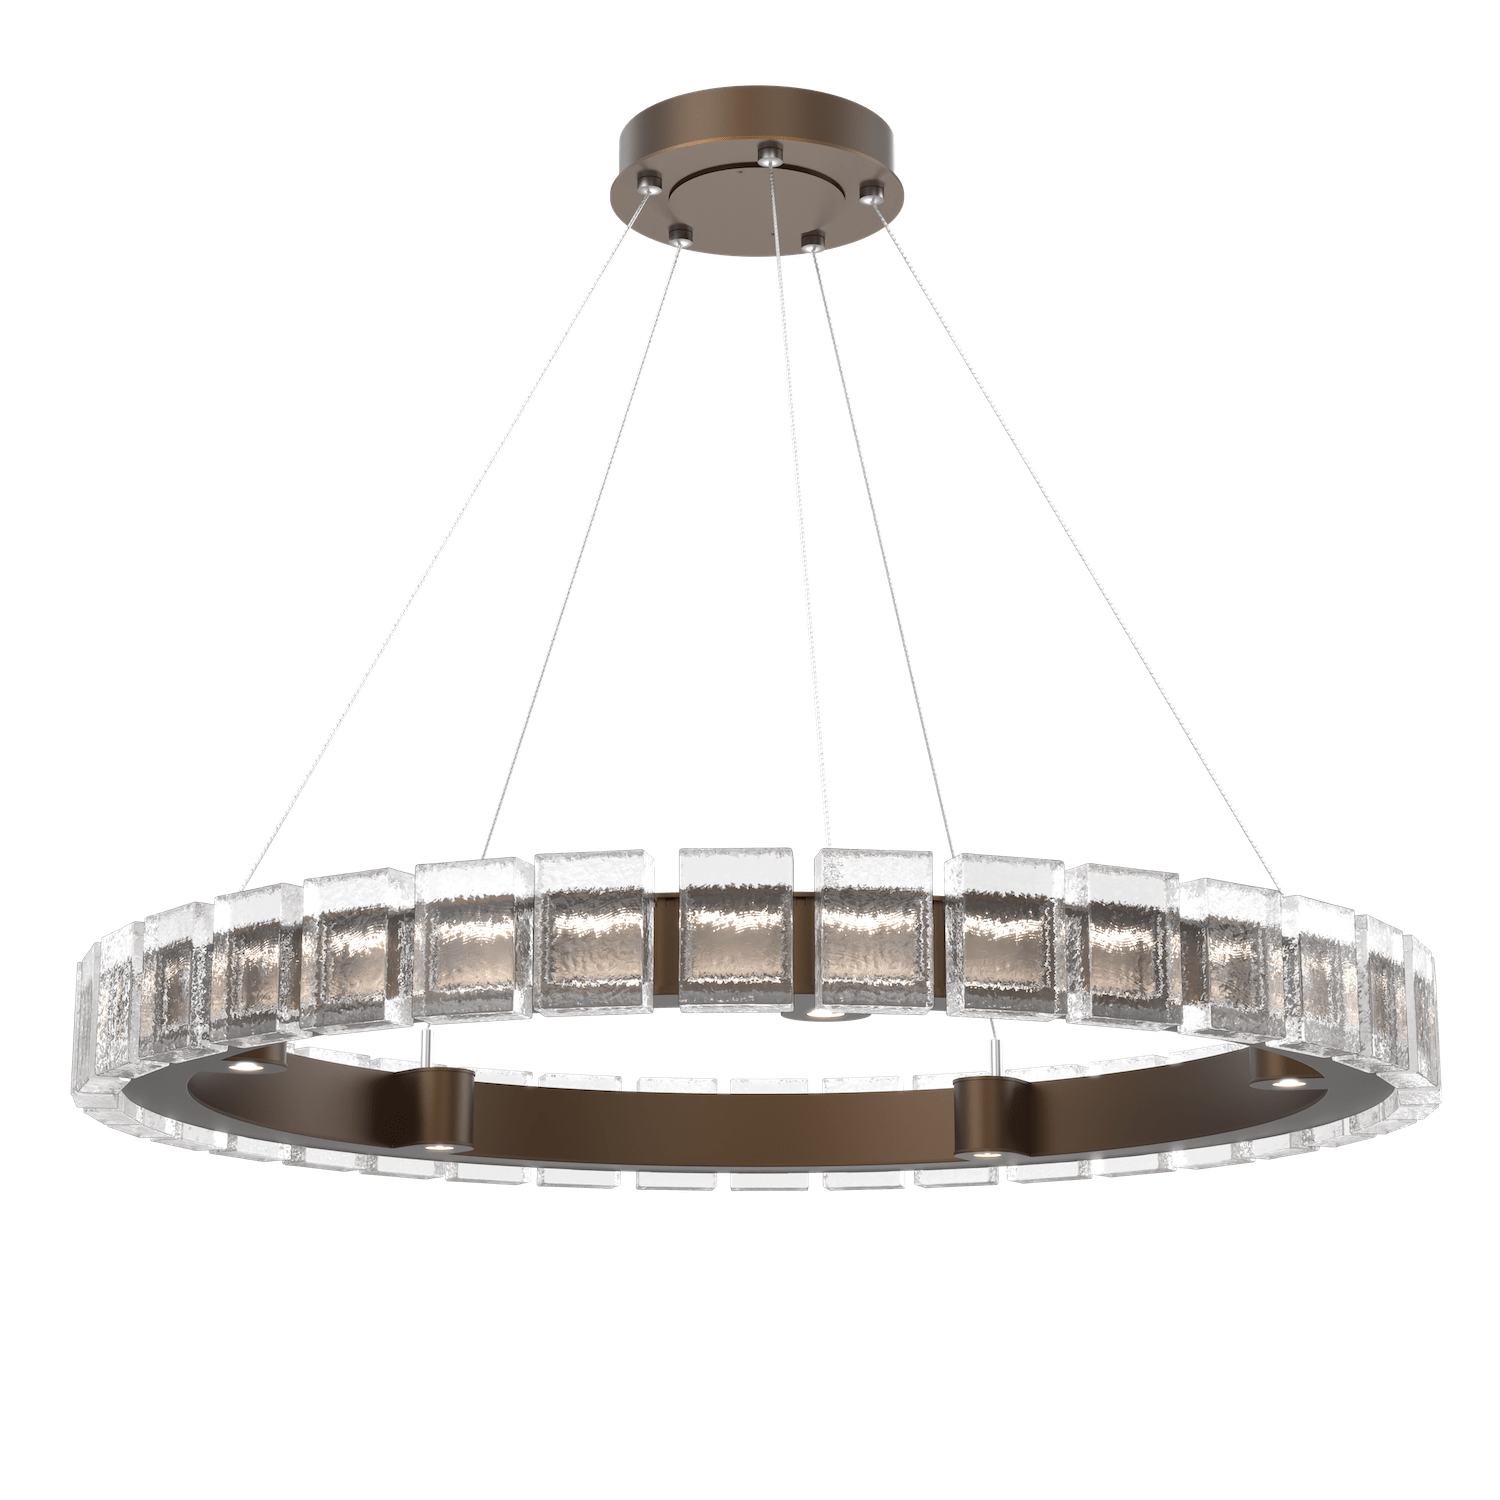 CHB0087-38-FB-TP-Hammerton-Studio-Tessera-38-inch-ring-chandelier-with-flat-bronze-finish-and-clear-pave-cast-glass-shade-and-LED-lamping